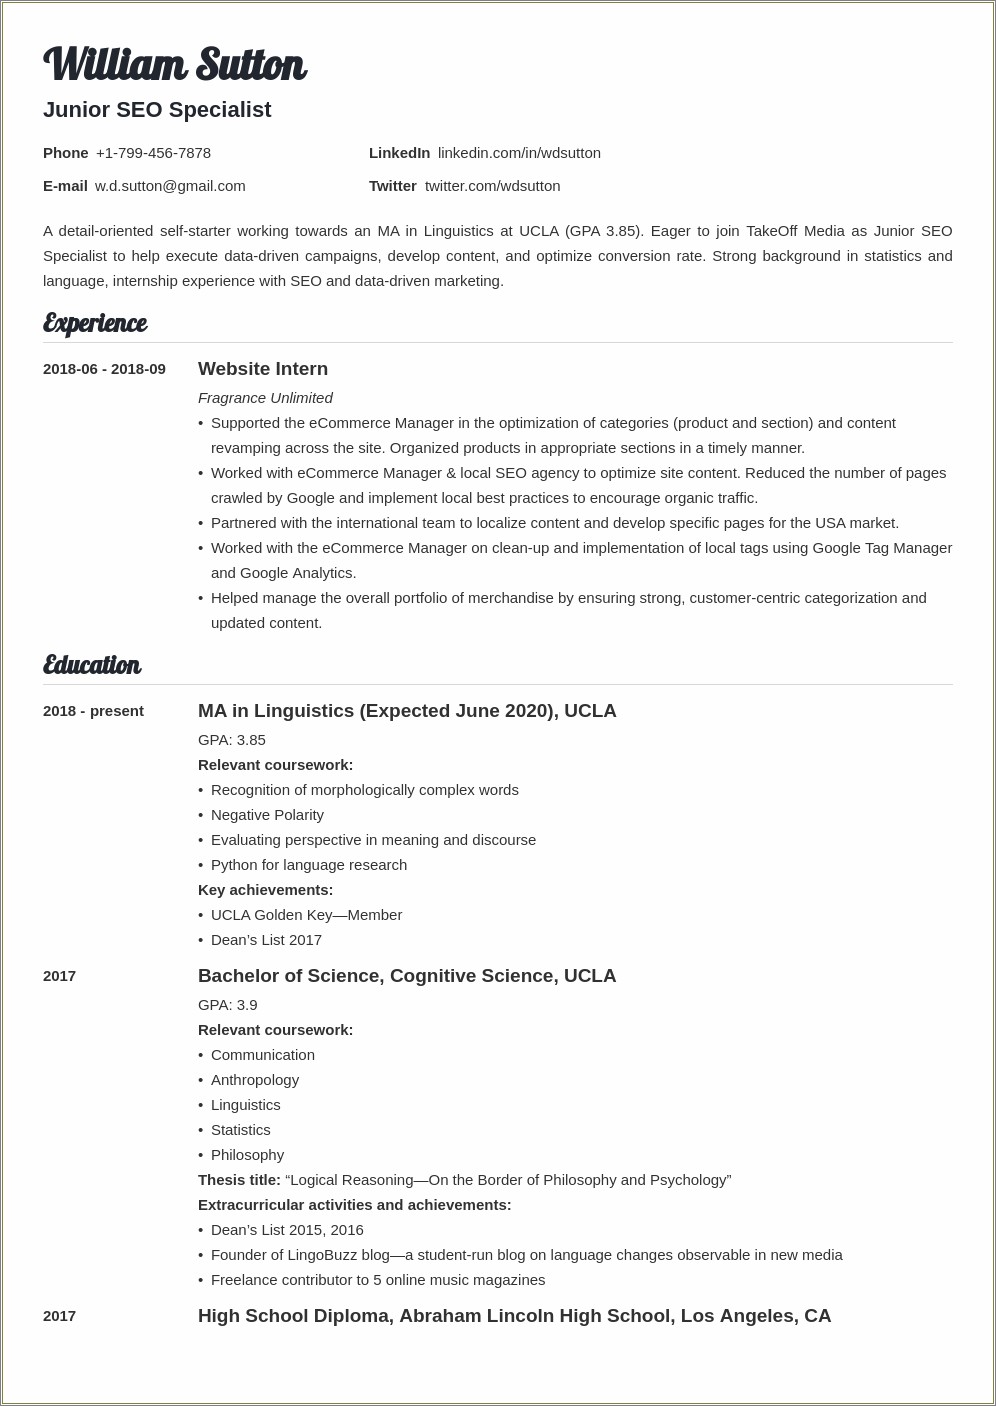 Resume Achievements Examples For Students